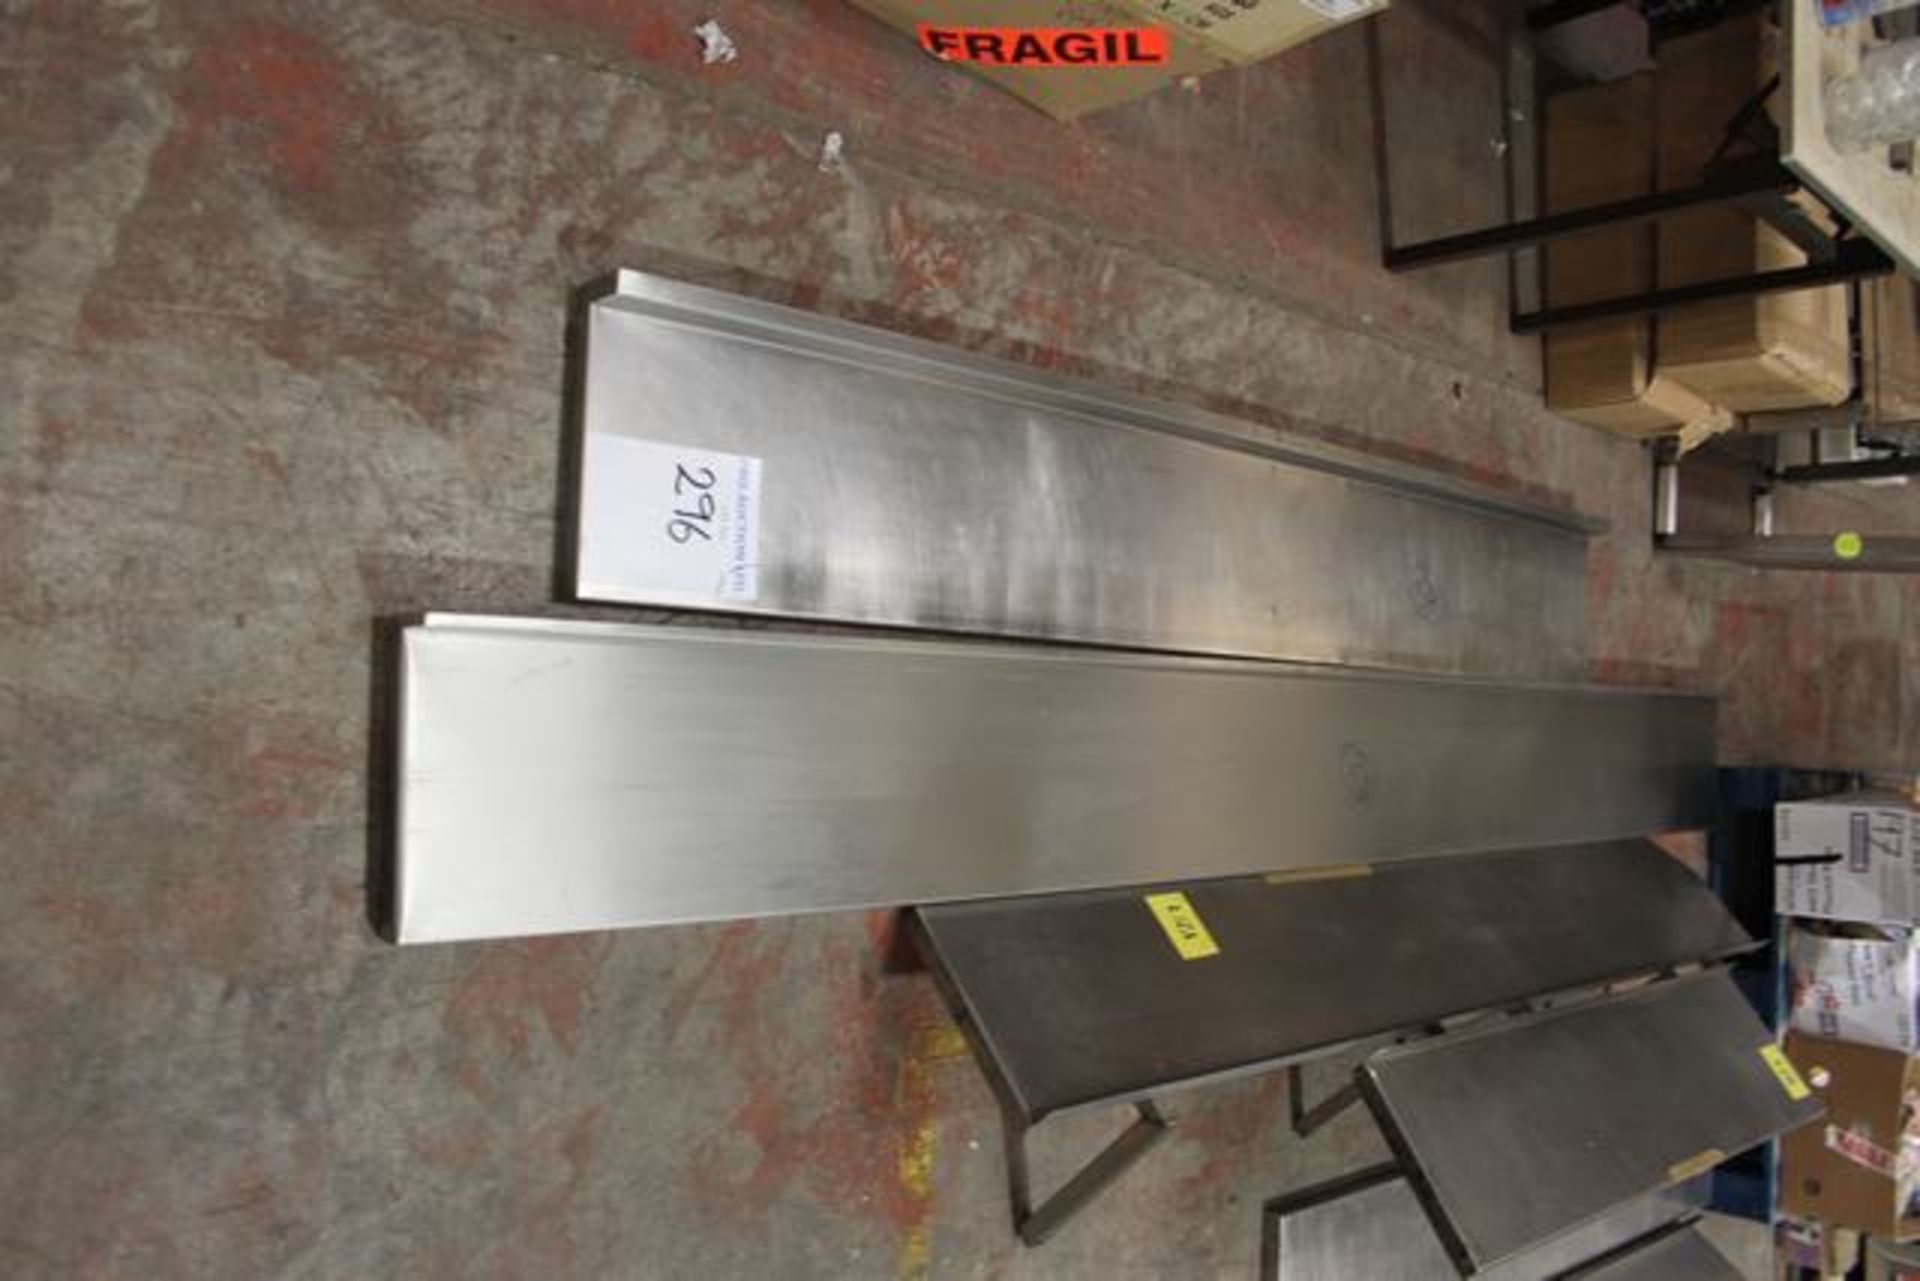 3 x Stainless steel wall shelf 3000mm x 310mm, 2200mm x 340mm and 2100mm x 300mm